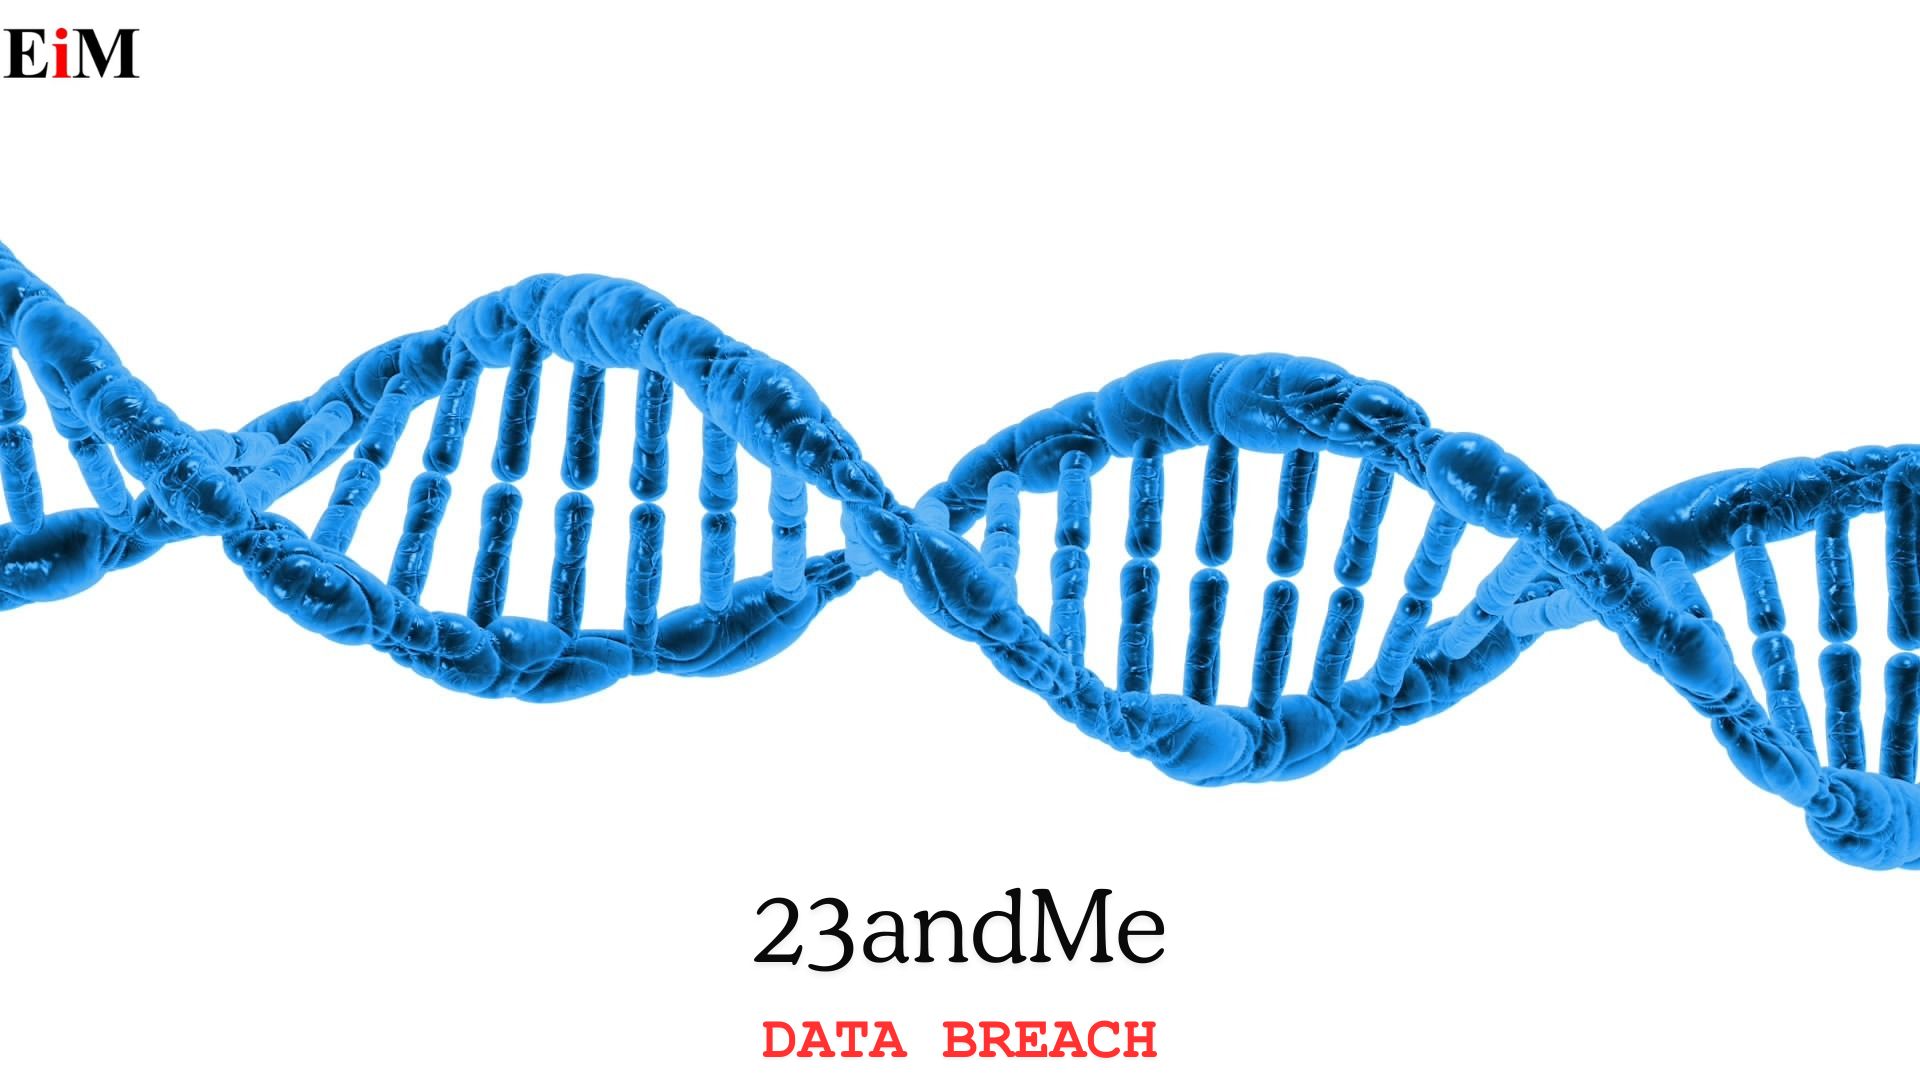 Privacy Under Threat: 23andMe Data Breach Impacting a Million Users